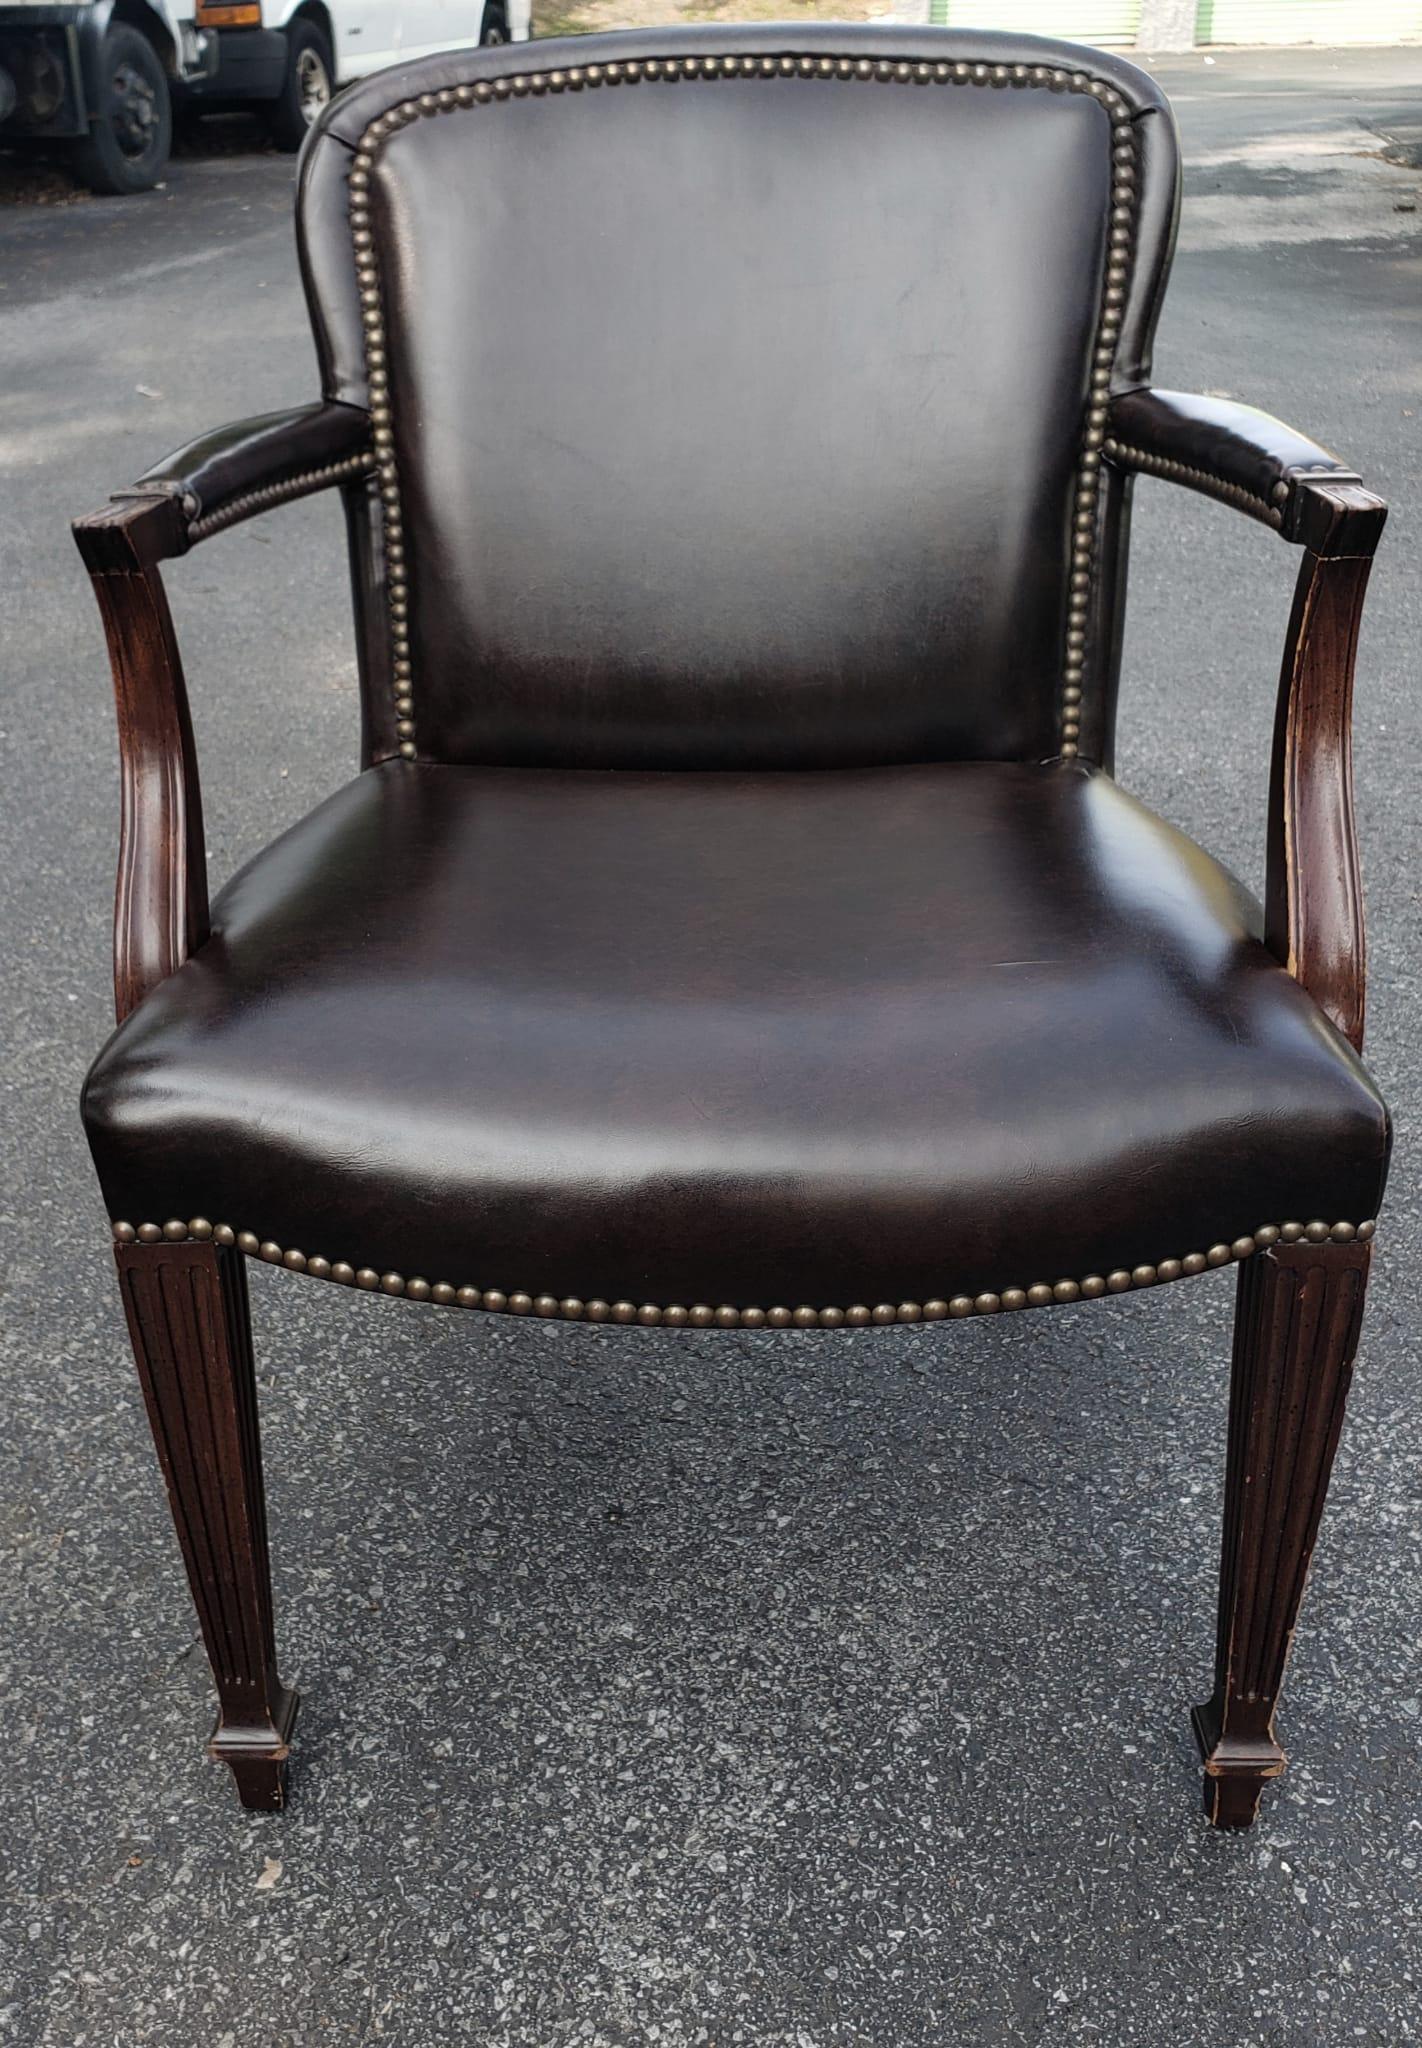 A Late 20th Century PU Leather Office Chair with Nailhead Trims by Drexel.
Measures 22'5